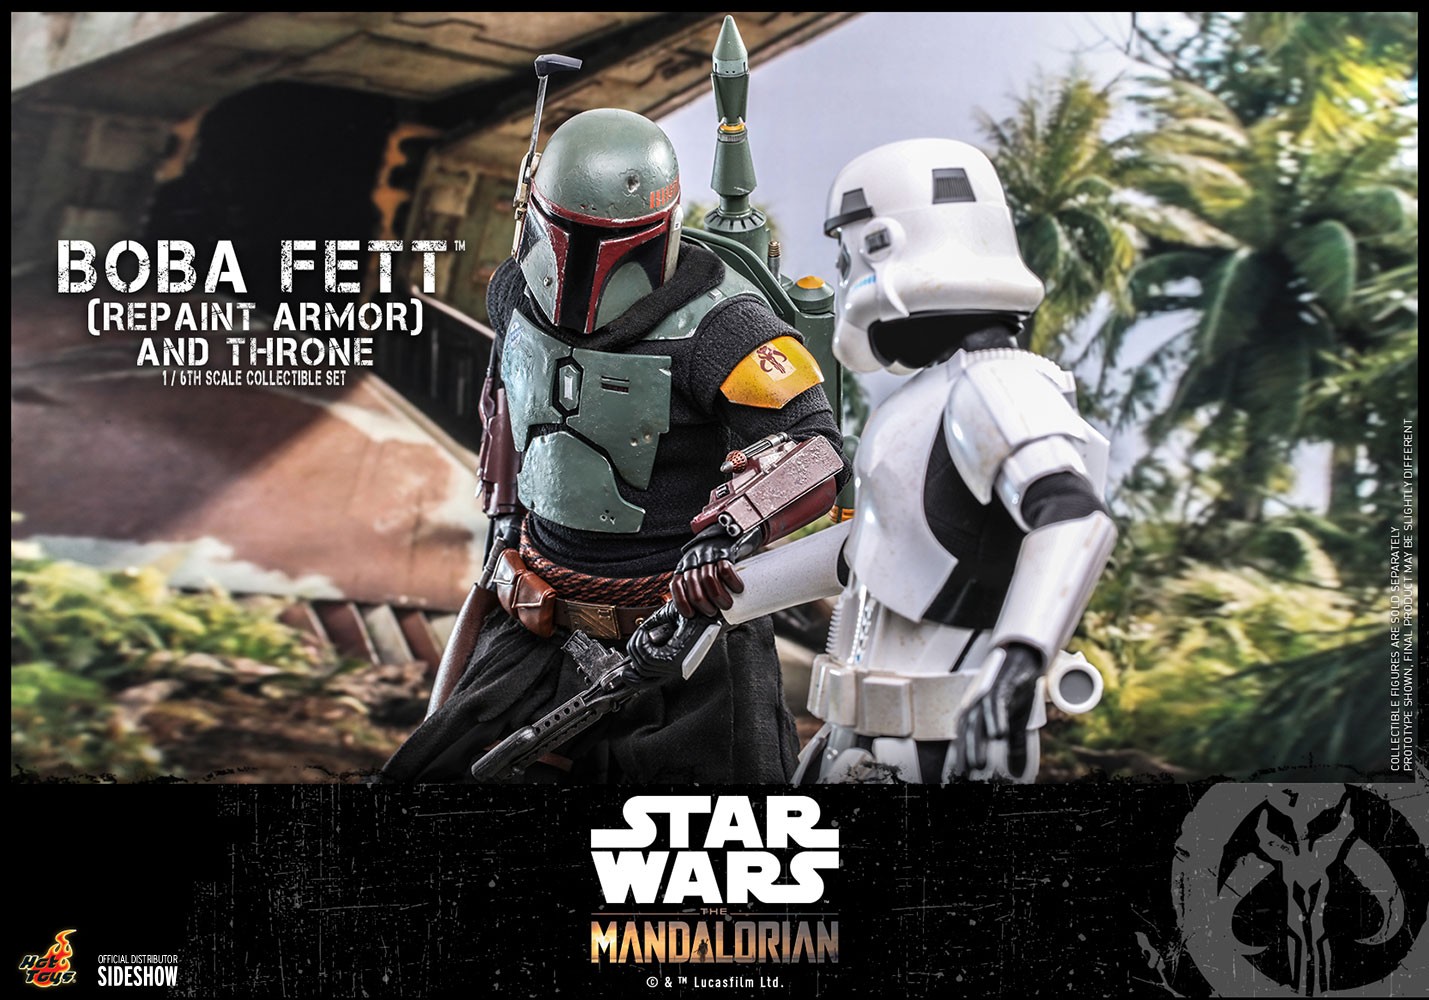 Boba Fett (Repaint Armor - Special Edition) and Throne Exclusive Edition (Prototype Shown) View 4